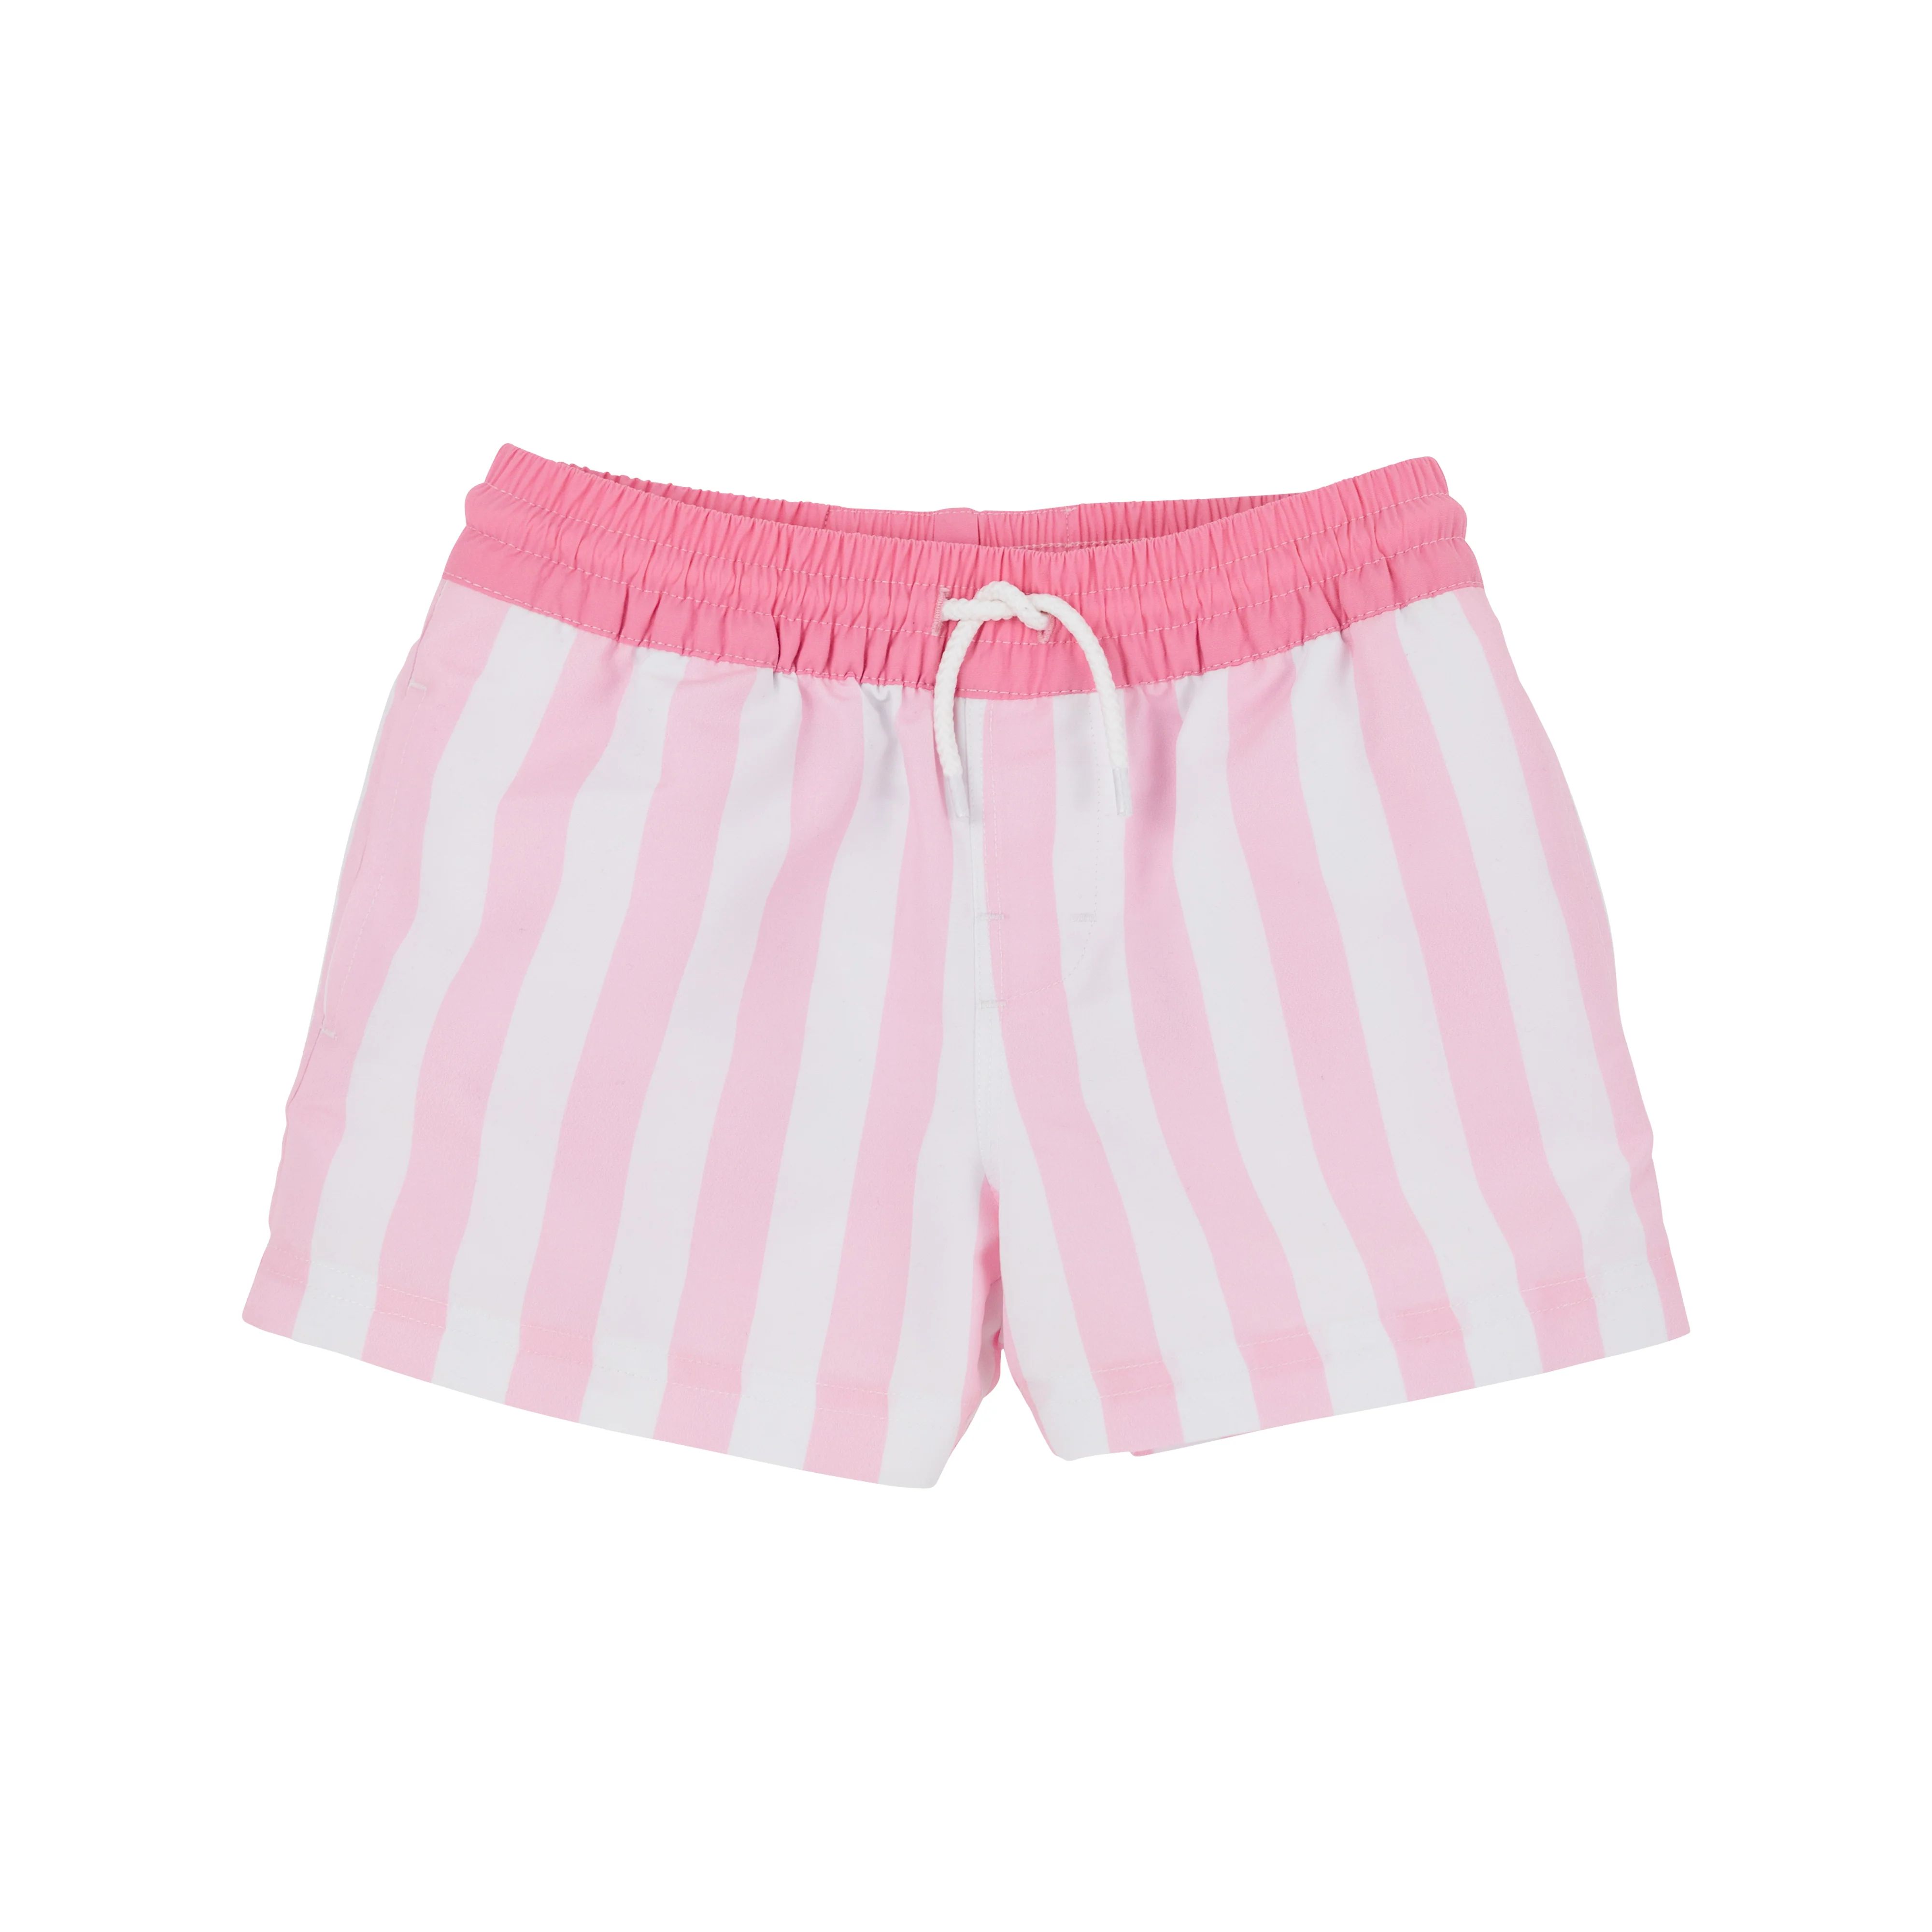 Turtle Bay Trunks - Caicos Cabana Stripe with Hamptons Hot Pink | The Beaufort Bonnet Company